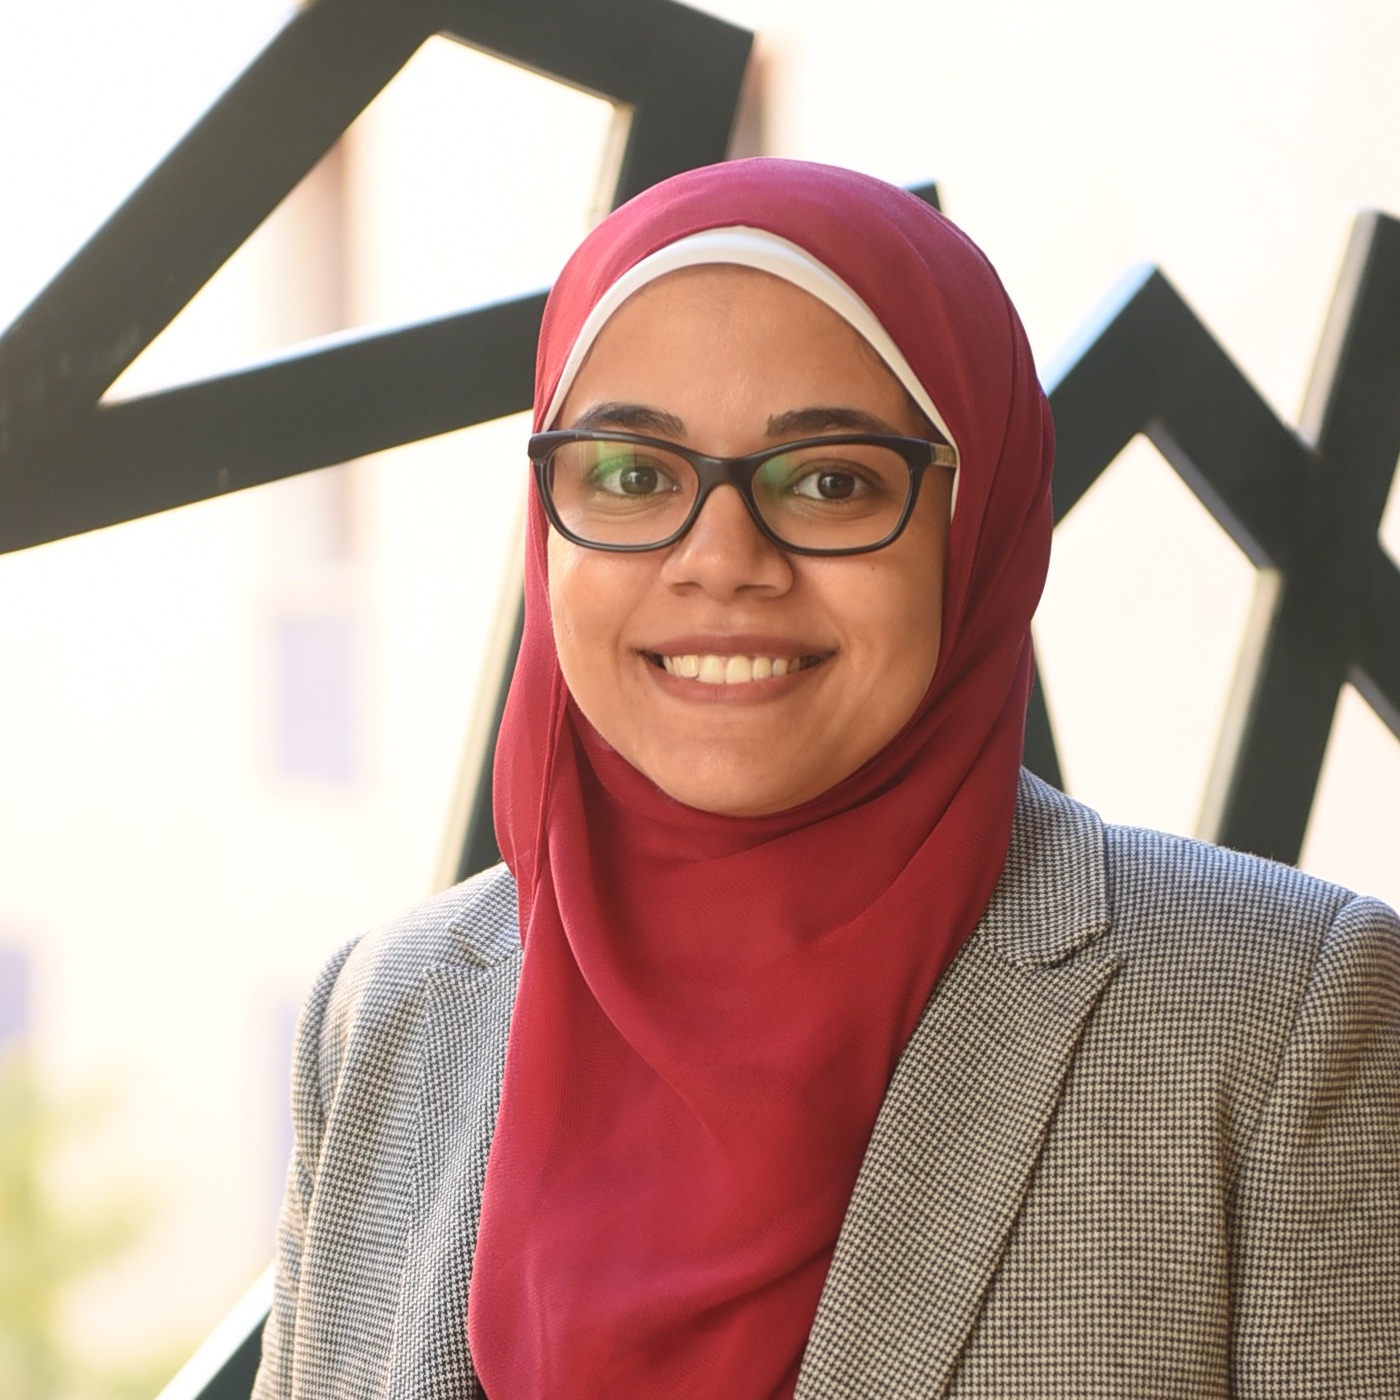 Nermeen Shehata, associate professor at the Department of Accounting